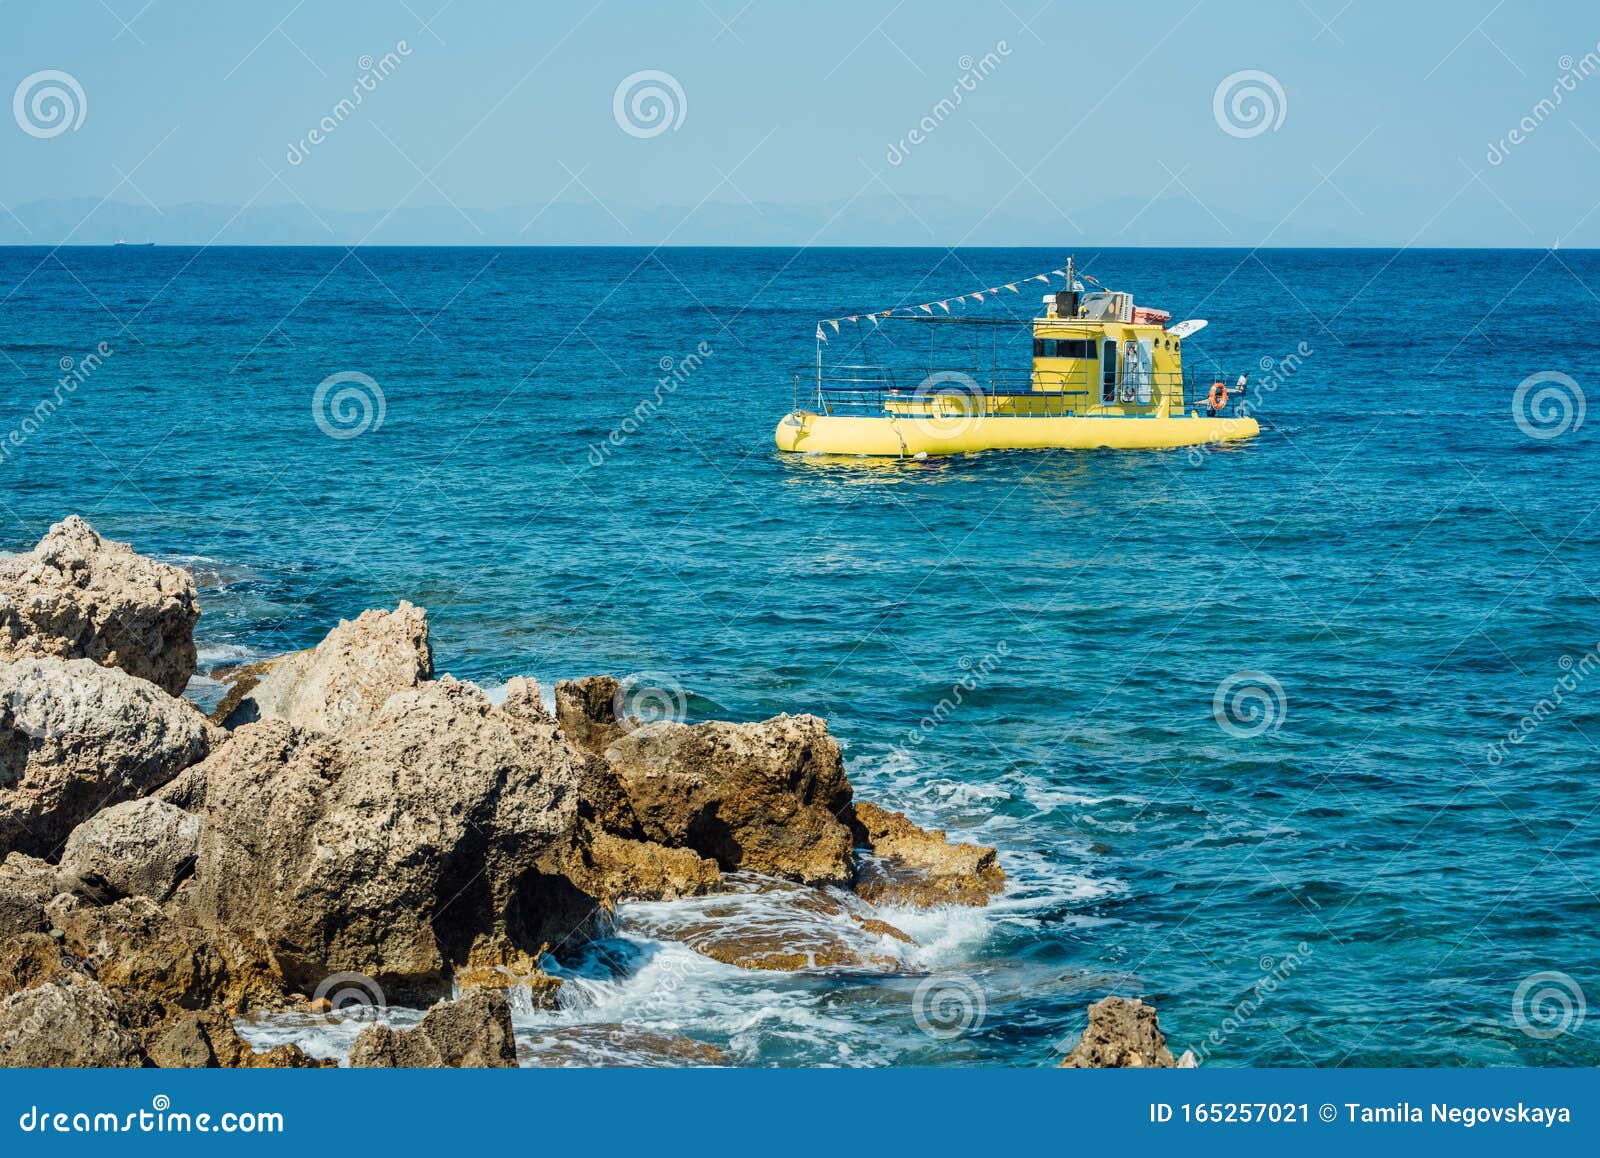 Funny Yellow Diving Boat with Lots of Flags of Different Countries